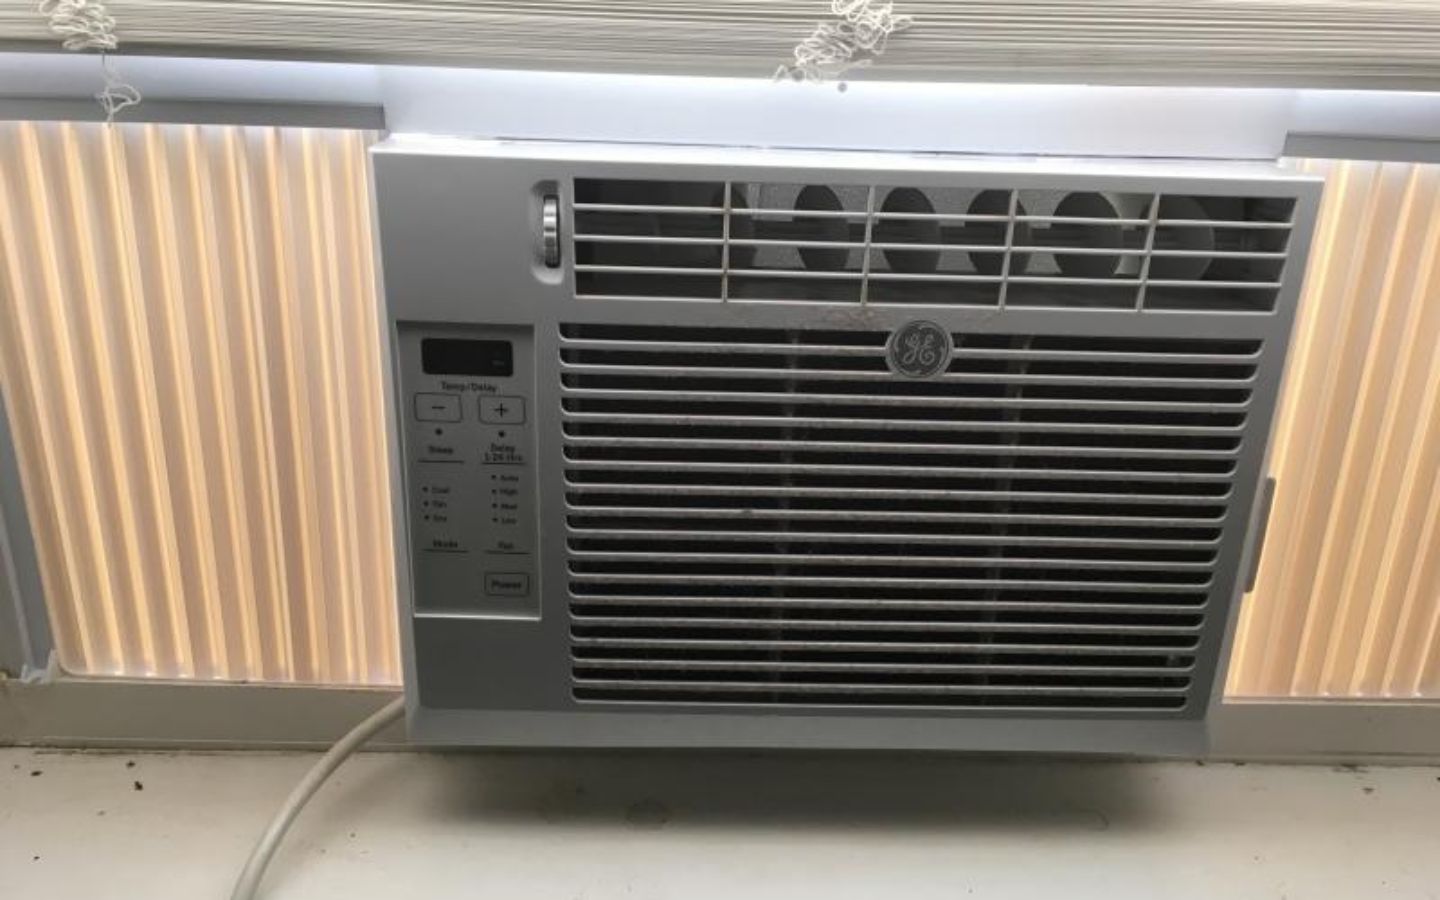 How To Fix The Error Code F27 For GE Air Conditioner